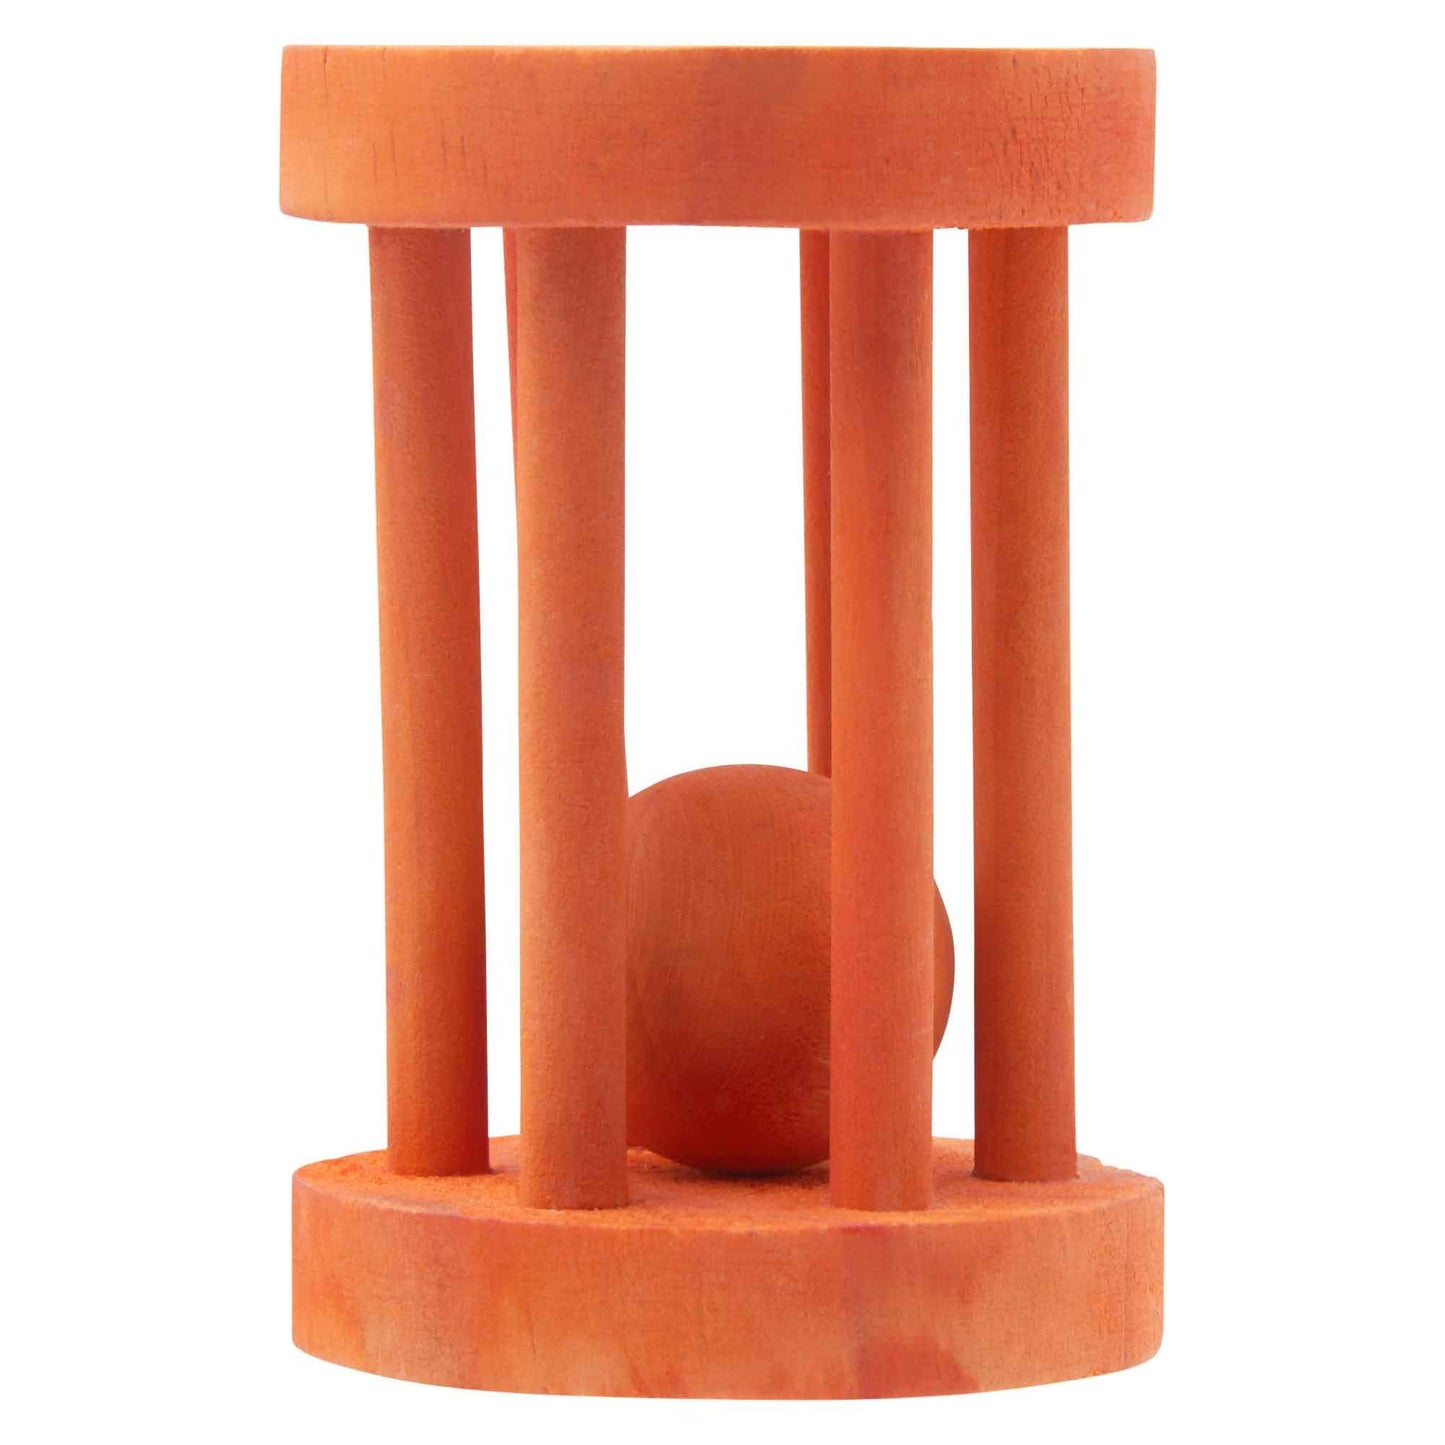 Lexi & Me Small Animal Wooden Chew Toy Rolling Barrel (100000024605) [default_color]